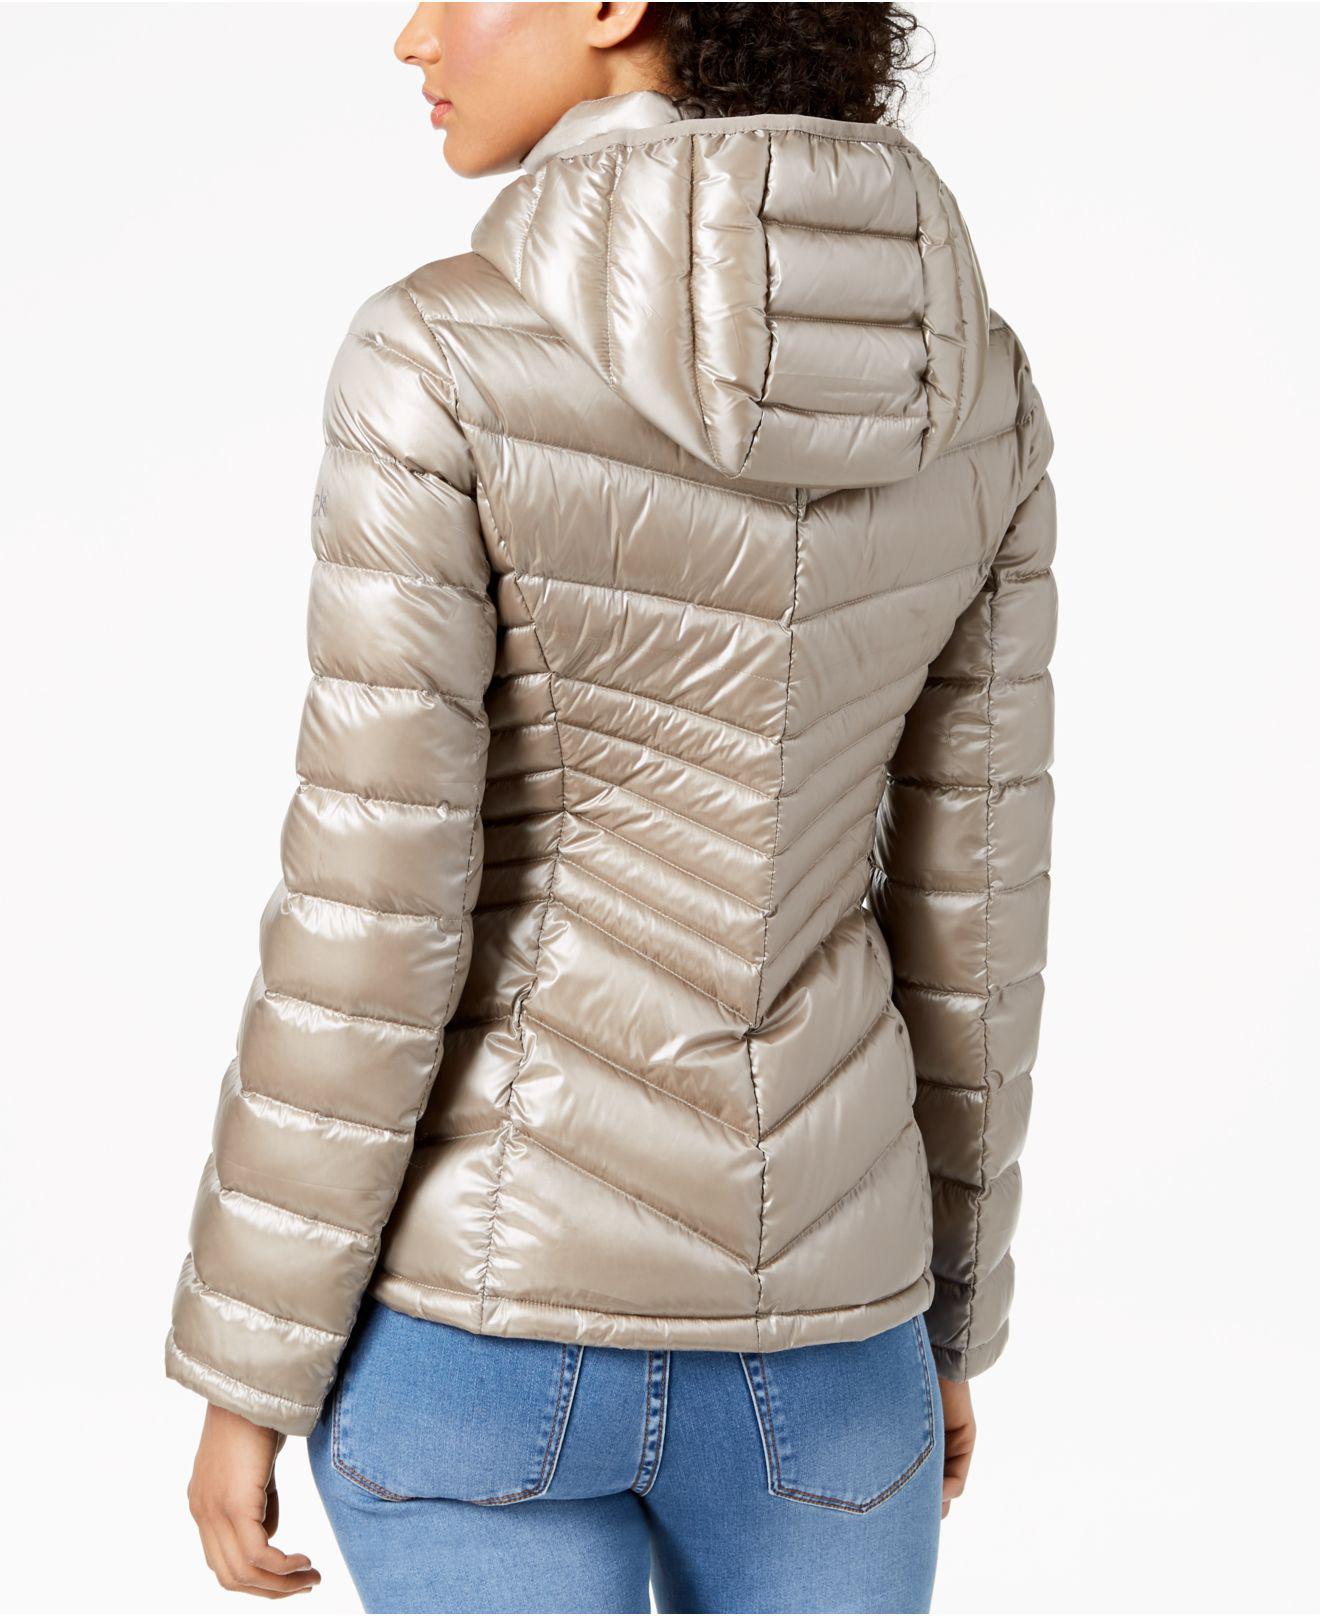 Calvin Klein Hooded Packable Puffer Coat in Natural - Lyst